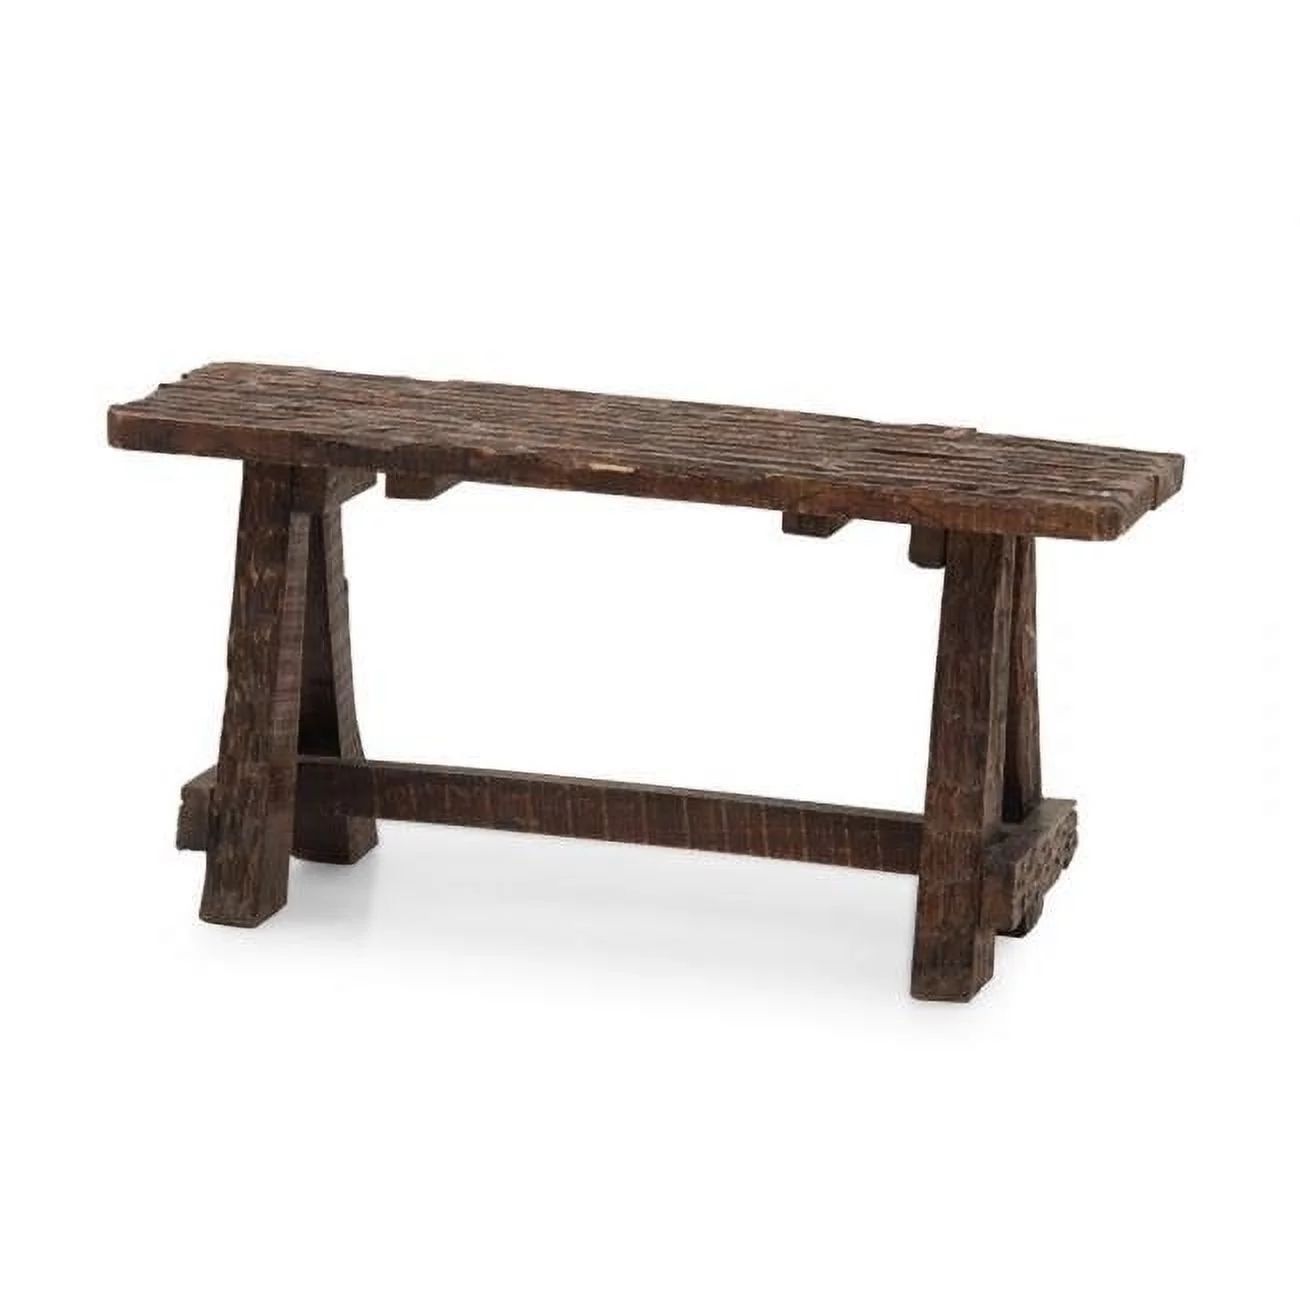 16 x 10.5 x 32 in. Customary Bench with Retro Etching | Walmart (US)